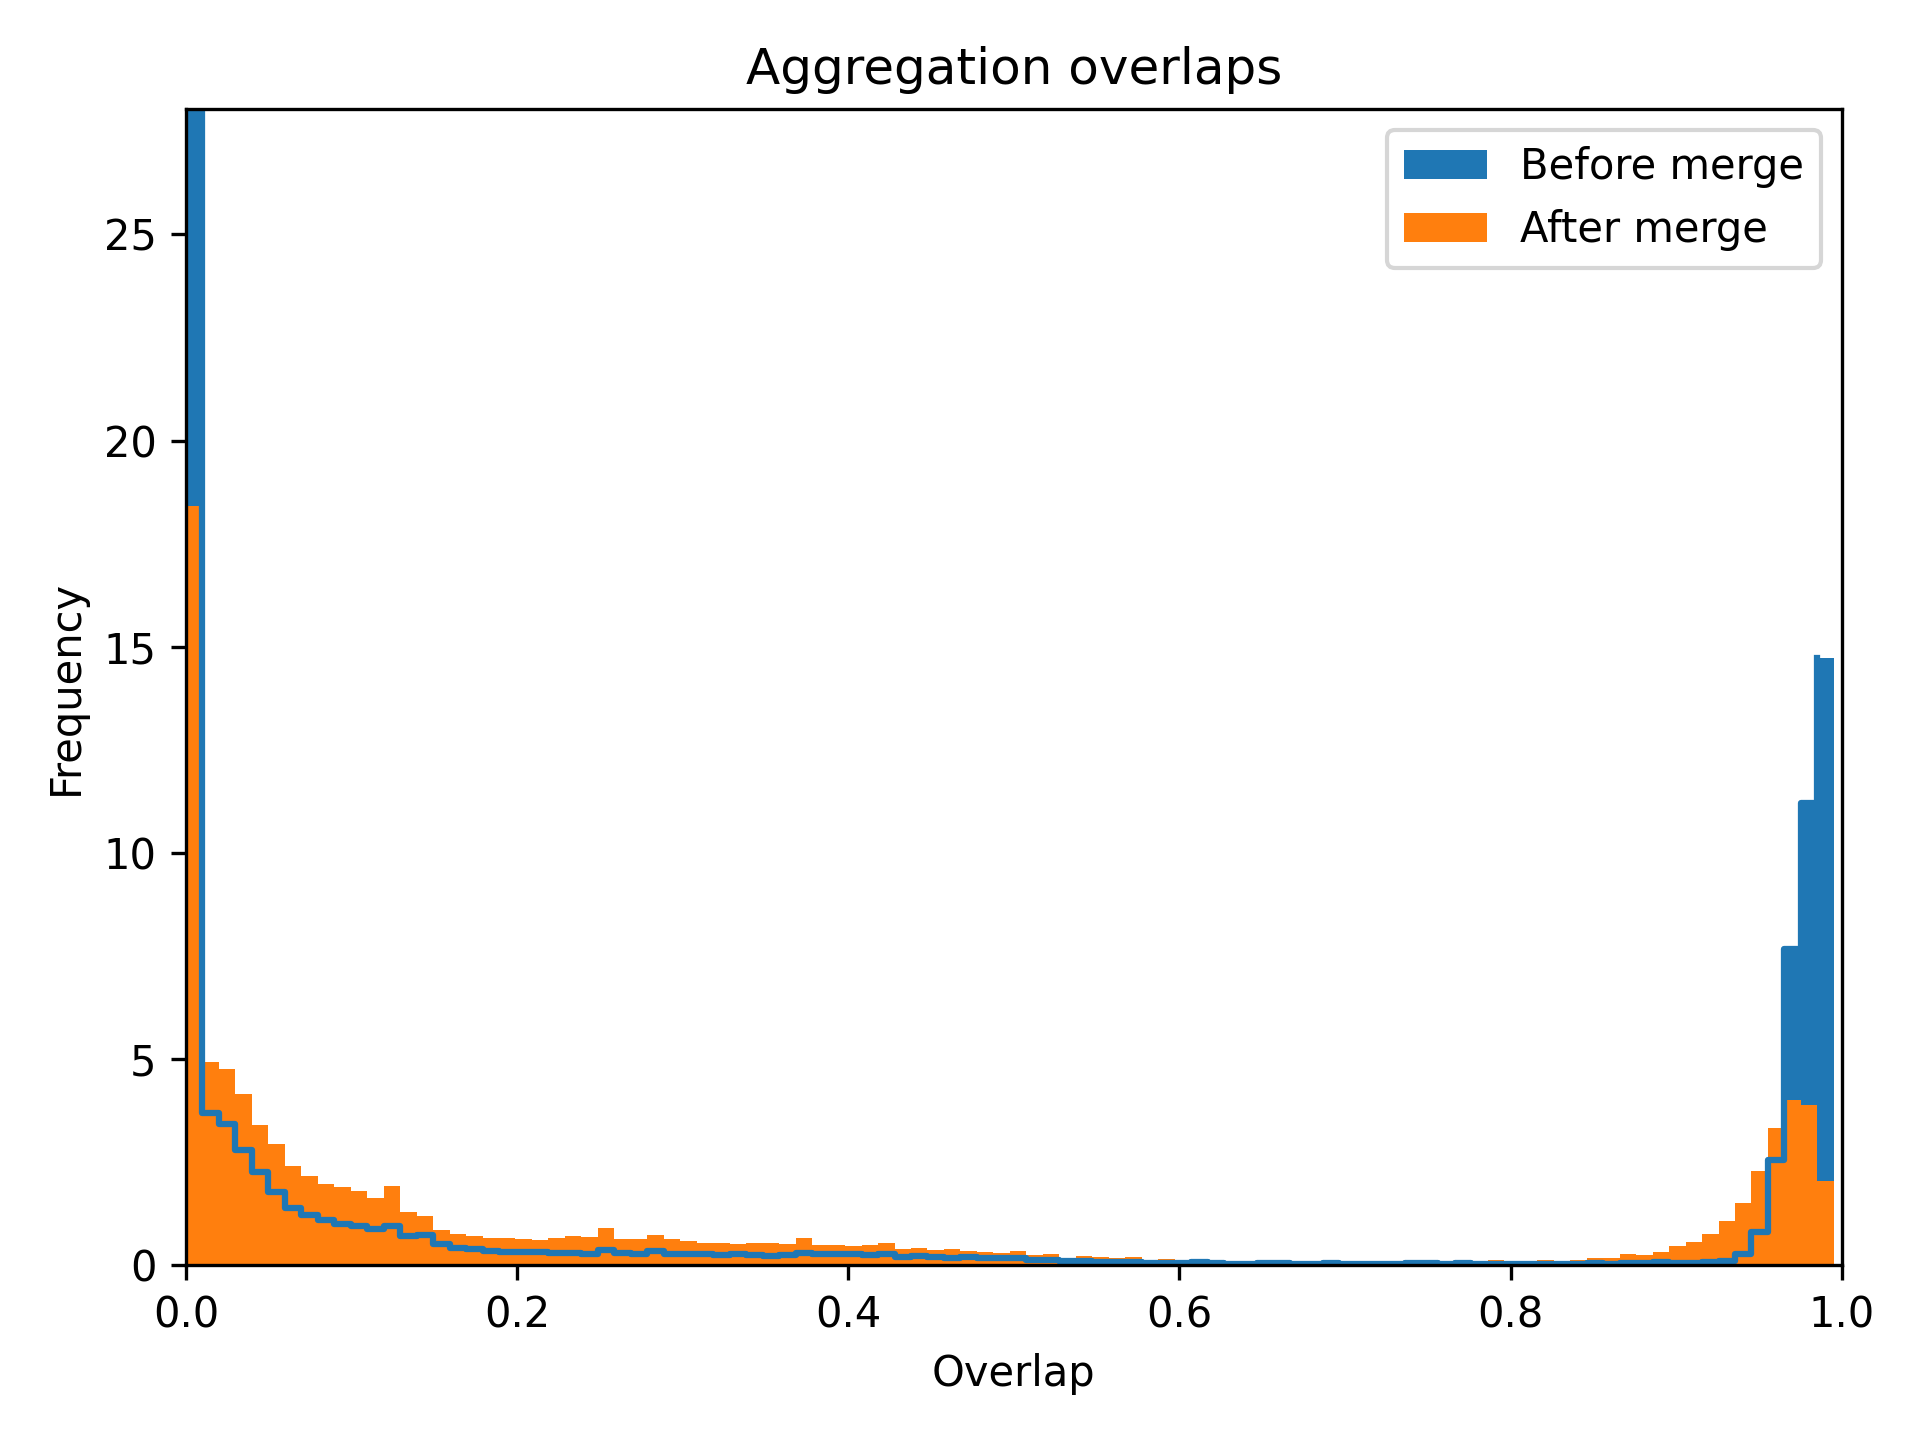 The overlap in signers of the two heaviest attestations per aggregation process.